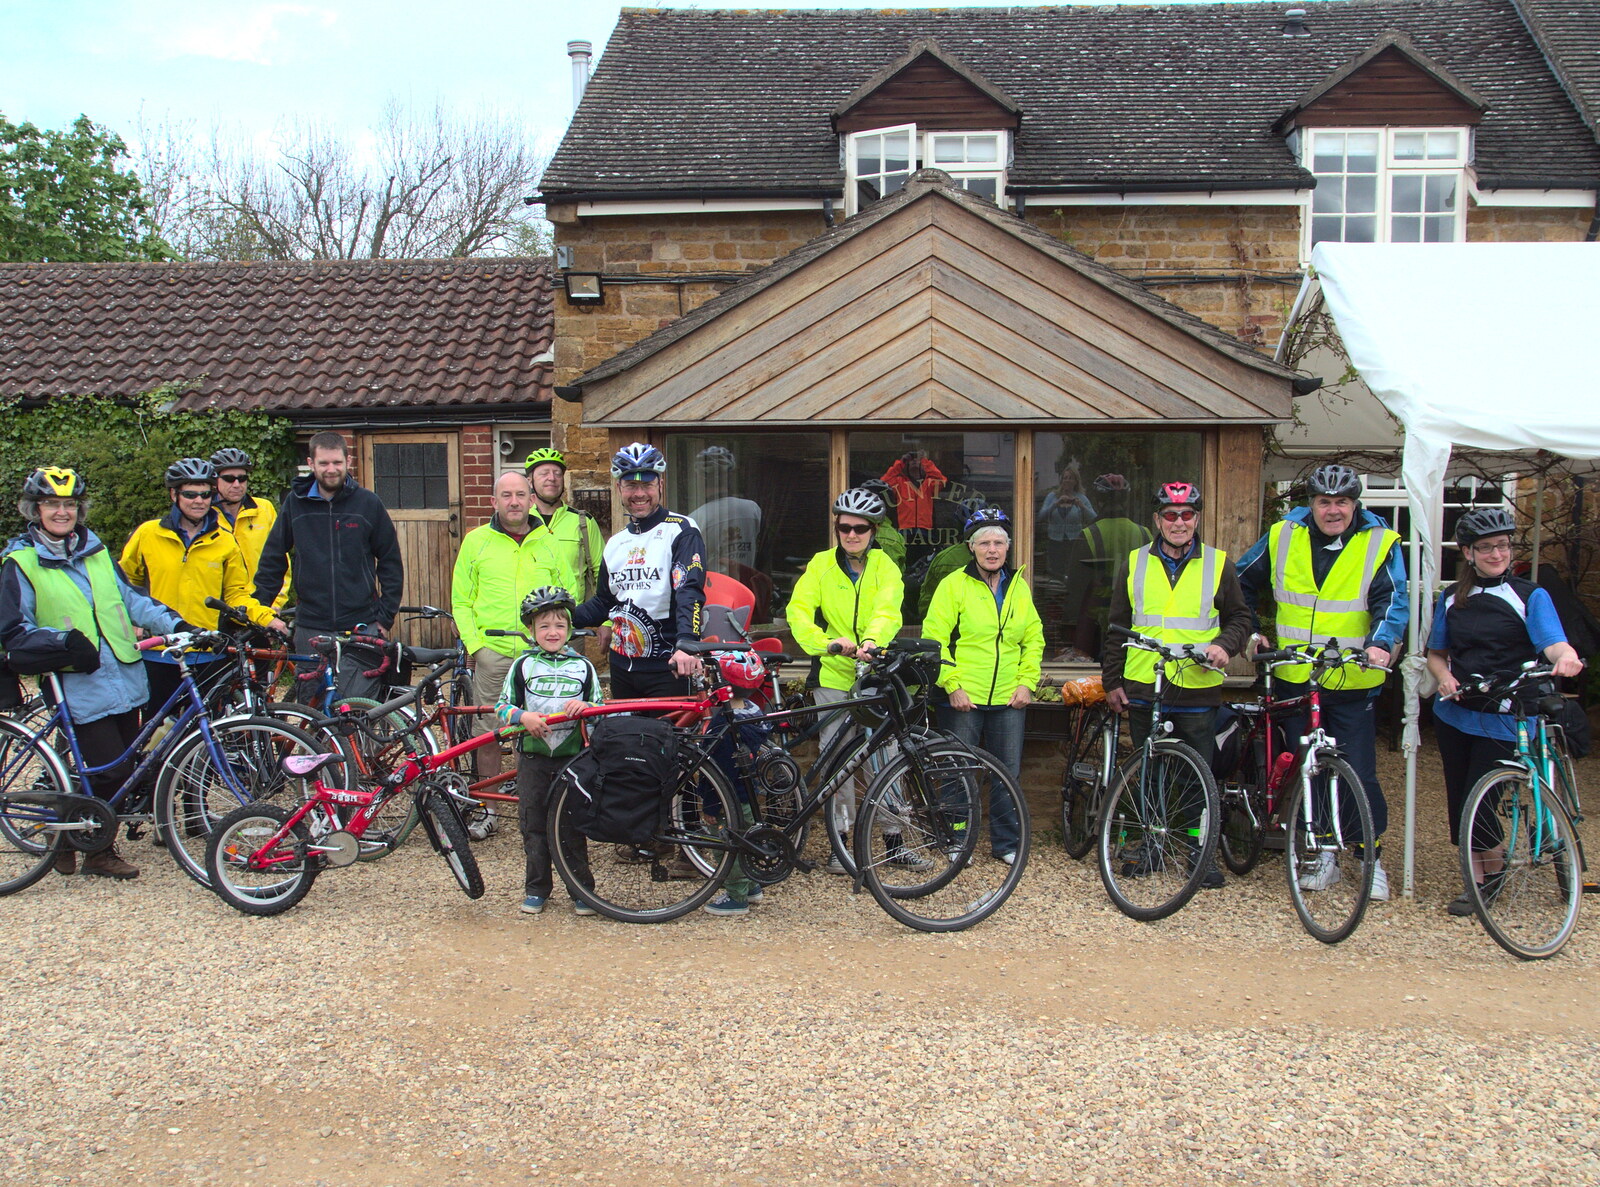 A BSCC group photo from The BSCC Weekend Away, Lyddington, Rutland - 9th May 2015